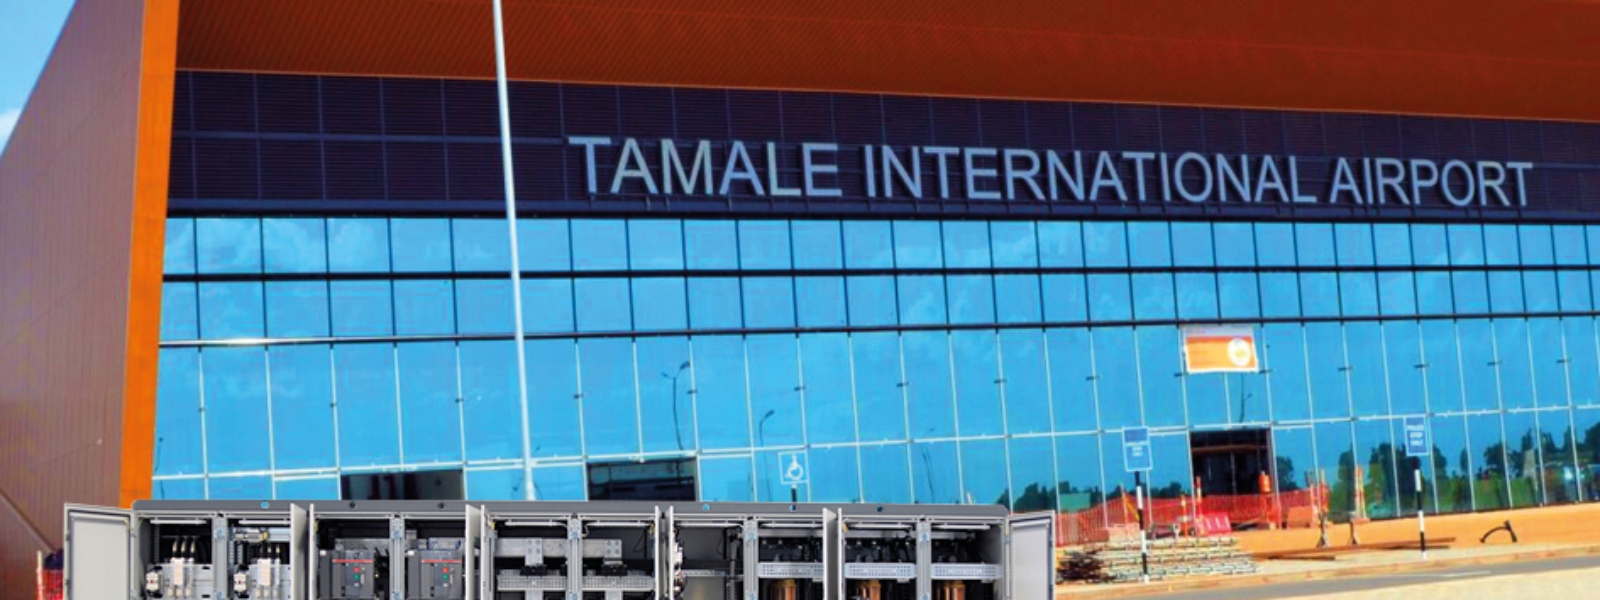 A FLIGHT TO ENERGY EFFICIENCY: ORTEA SOLUTION FOR TAMALE AIRPORT